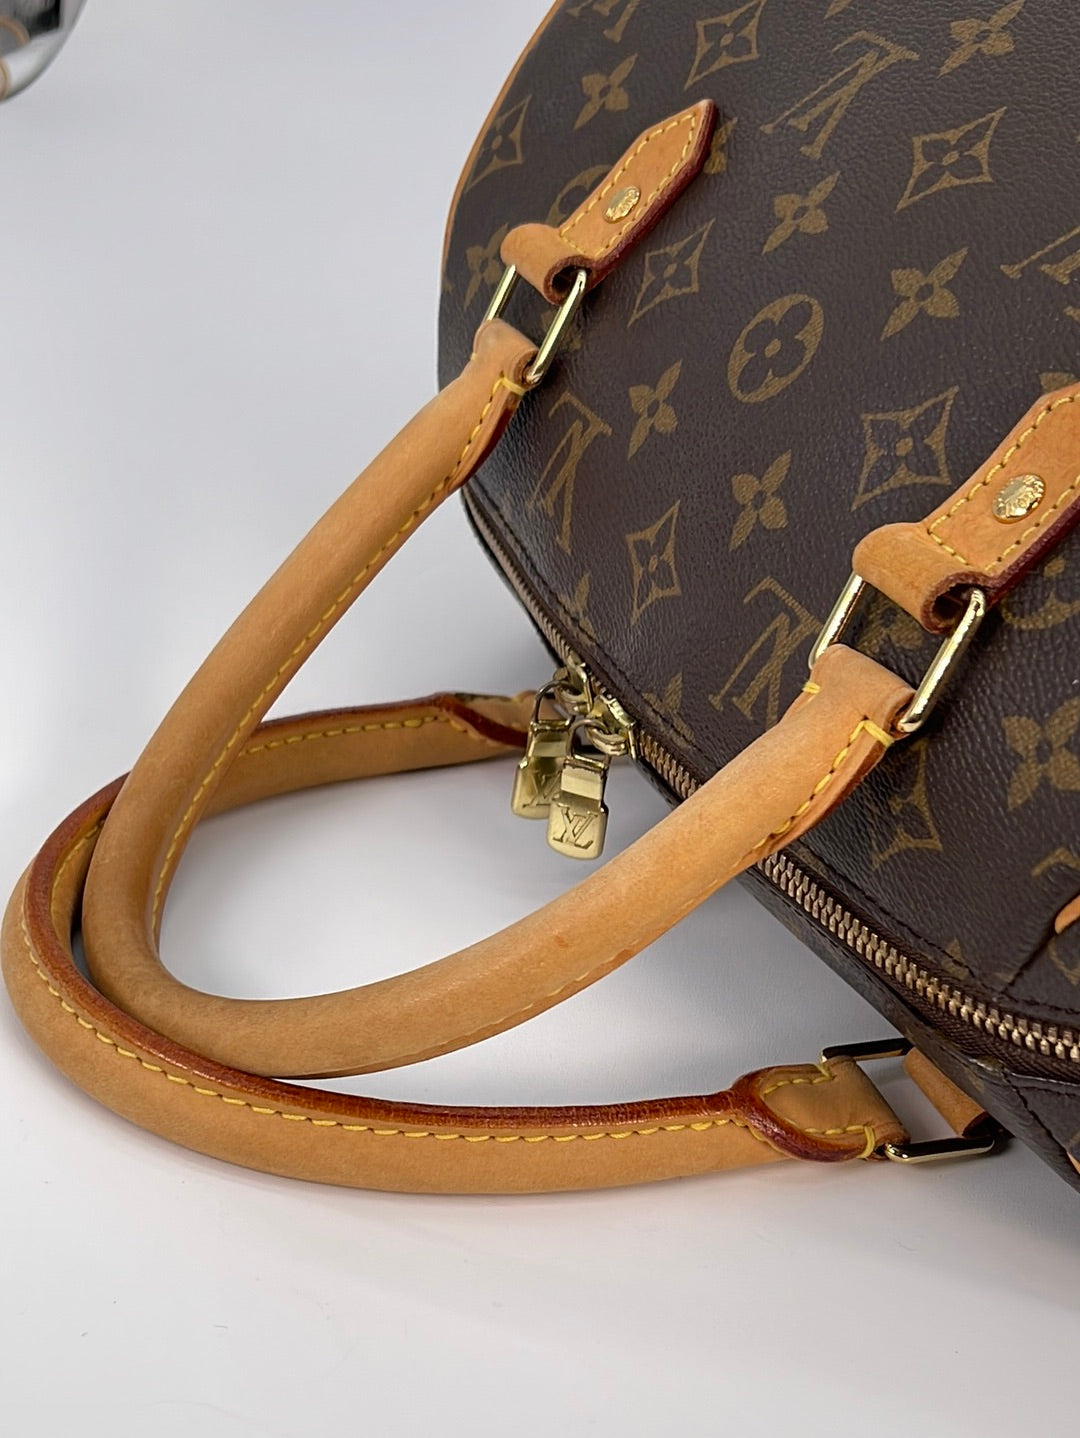 Louis Vuitton, Bags, Sold On Tradesy Louis Vuitton Riviera Mm Tot